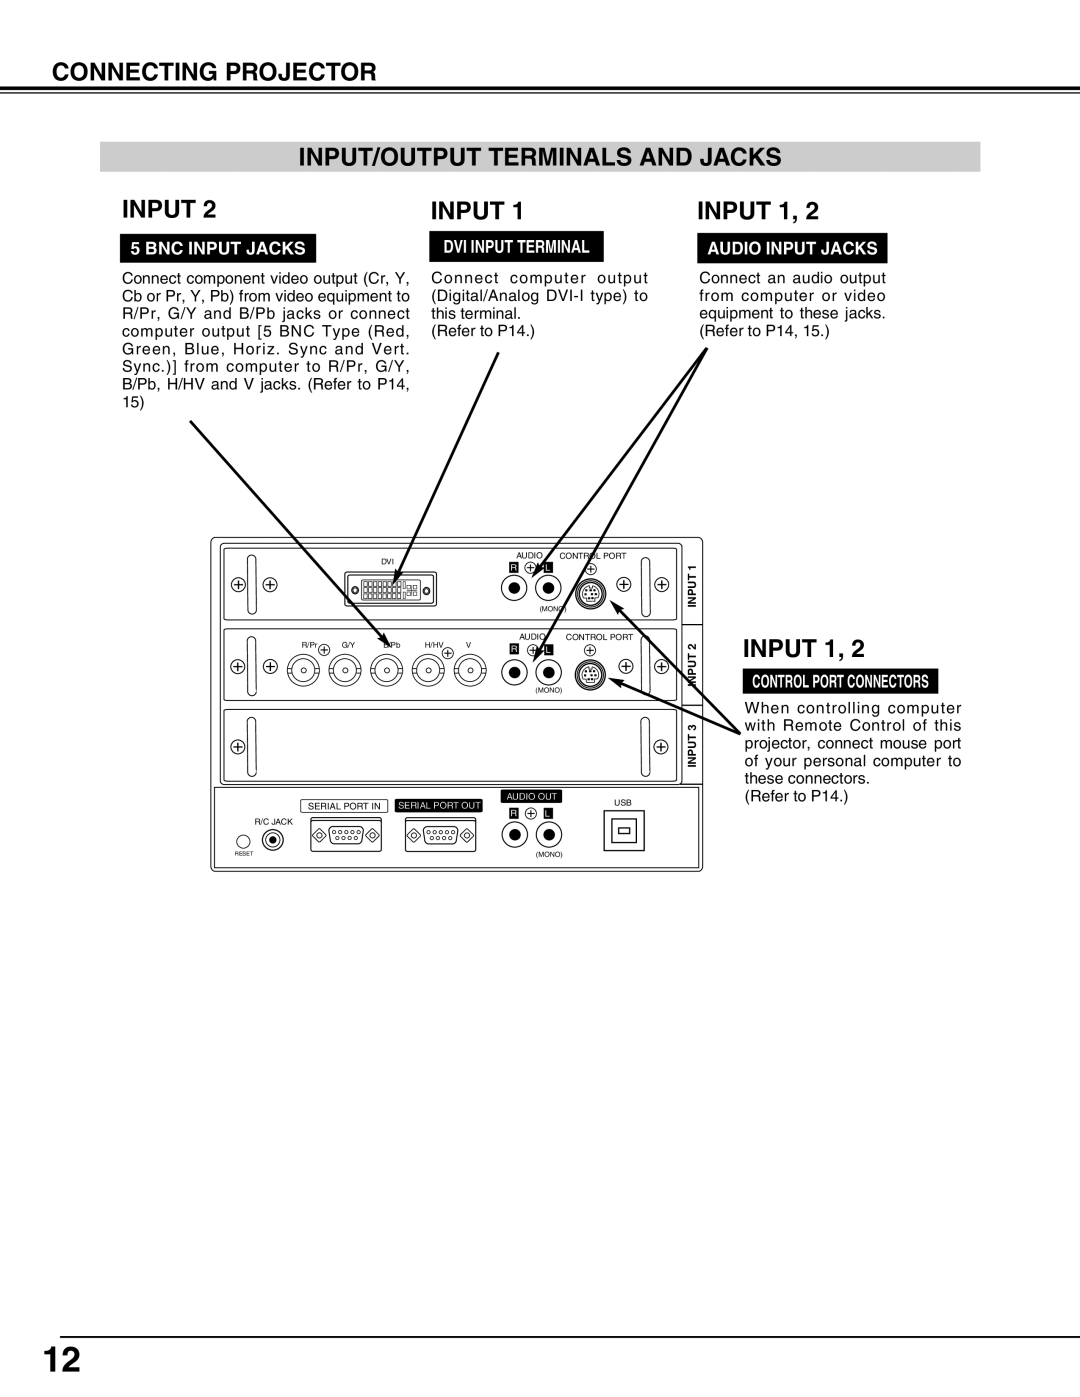 Christie Digital Systems 38-MX2001-01 user manual Connecting Projector Input/Output Terminals And Jacks, INPUT 1 